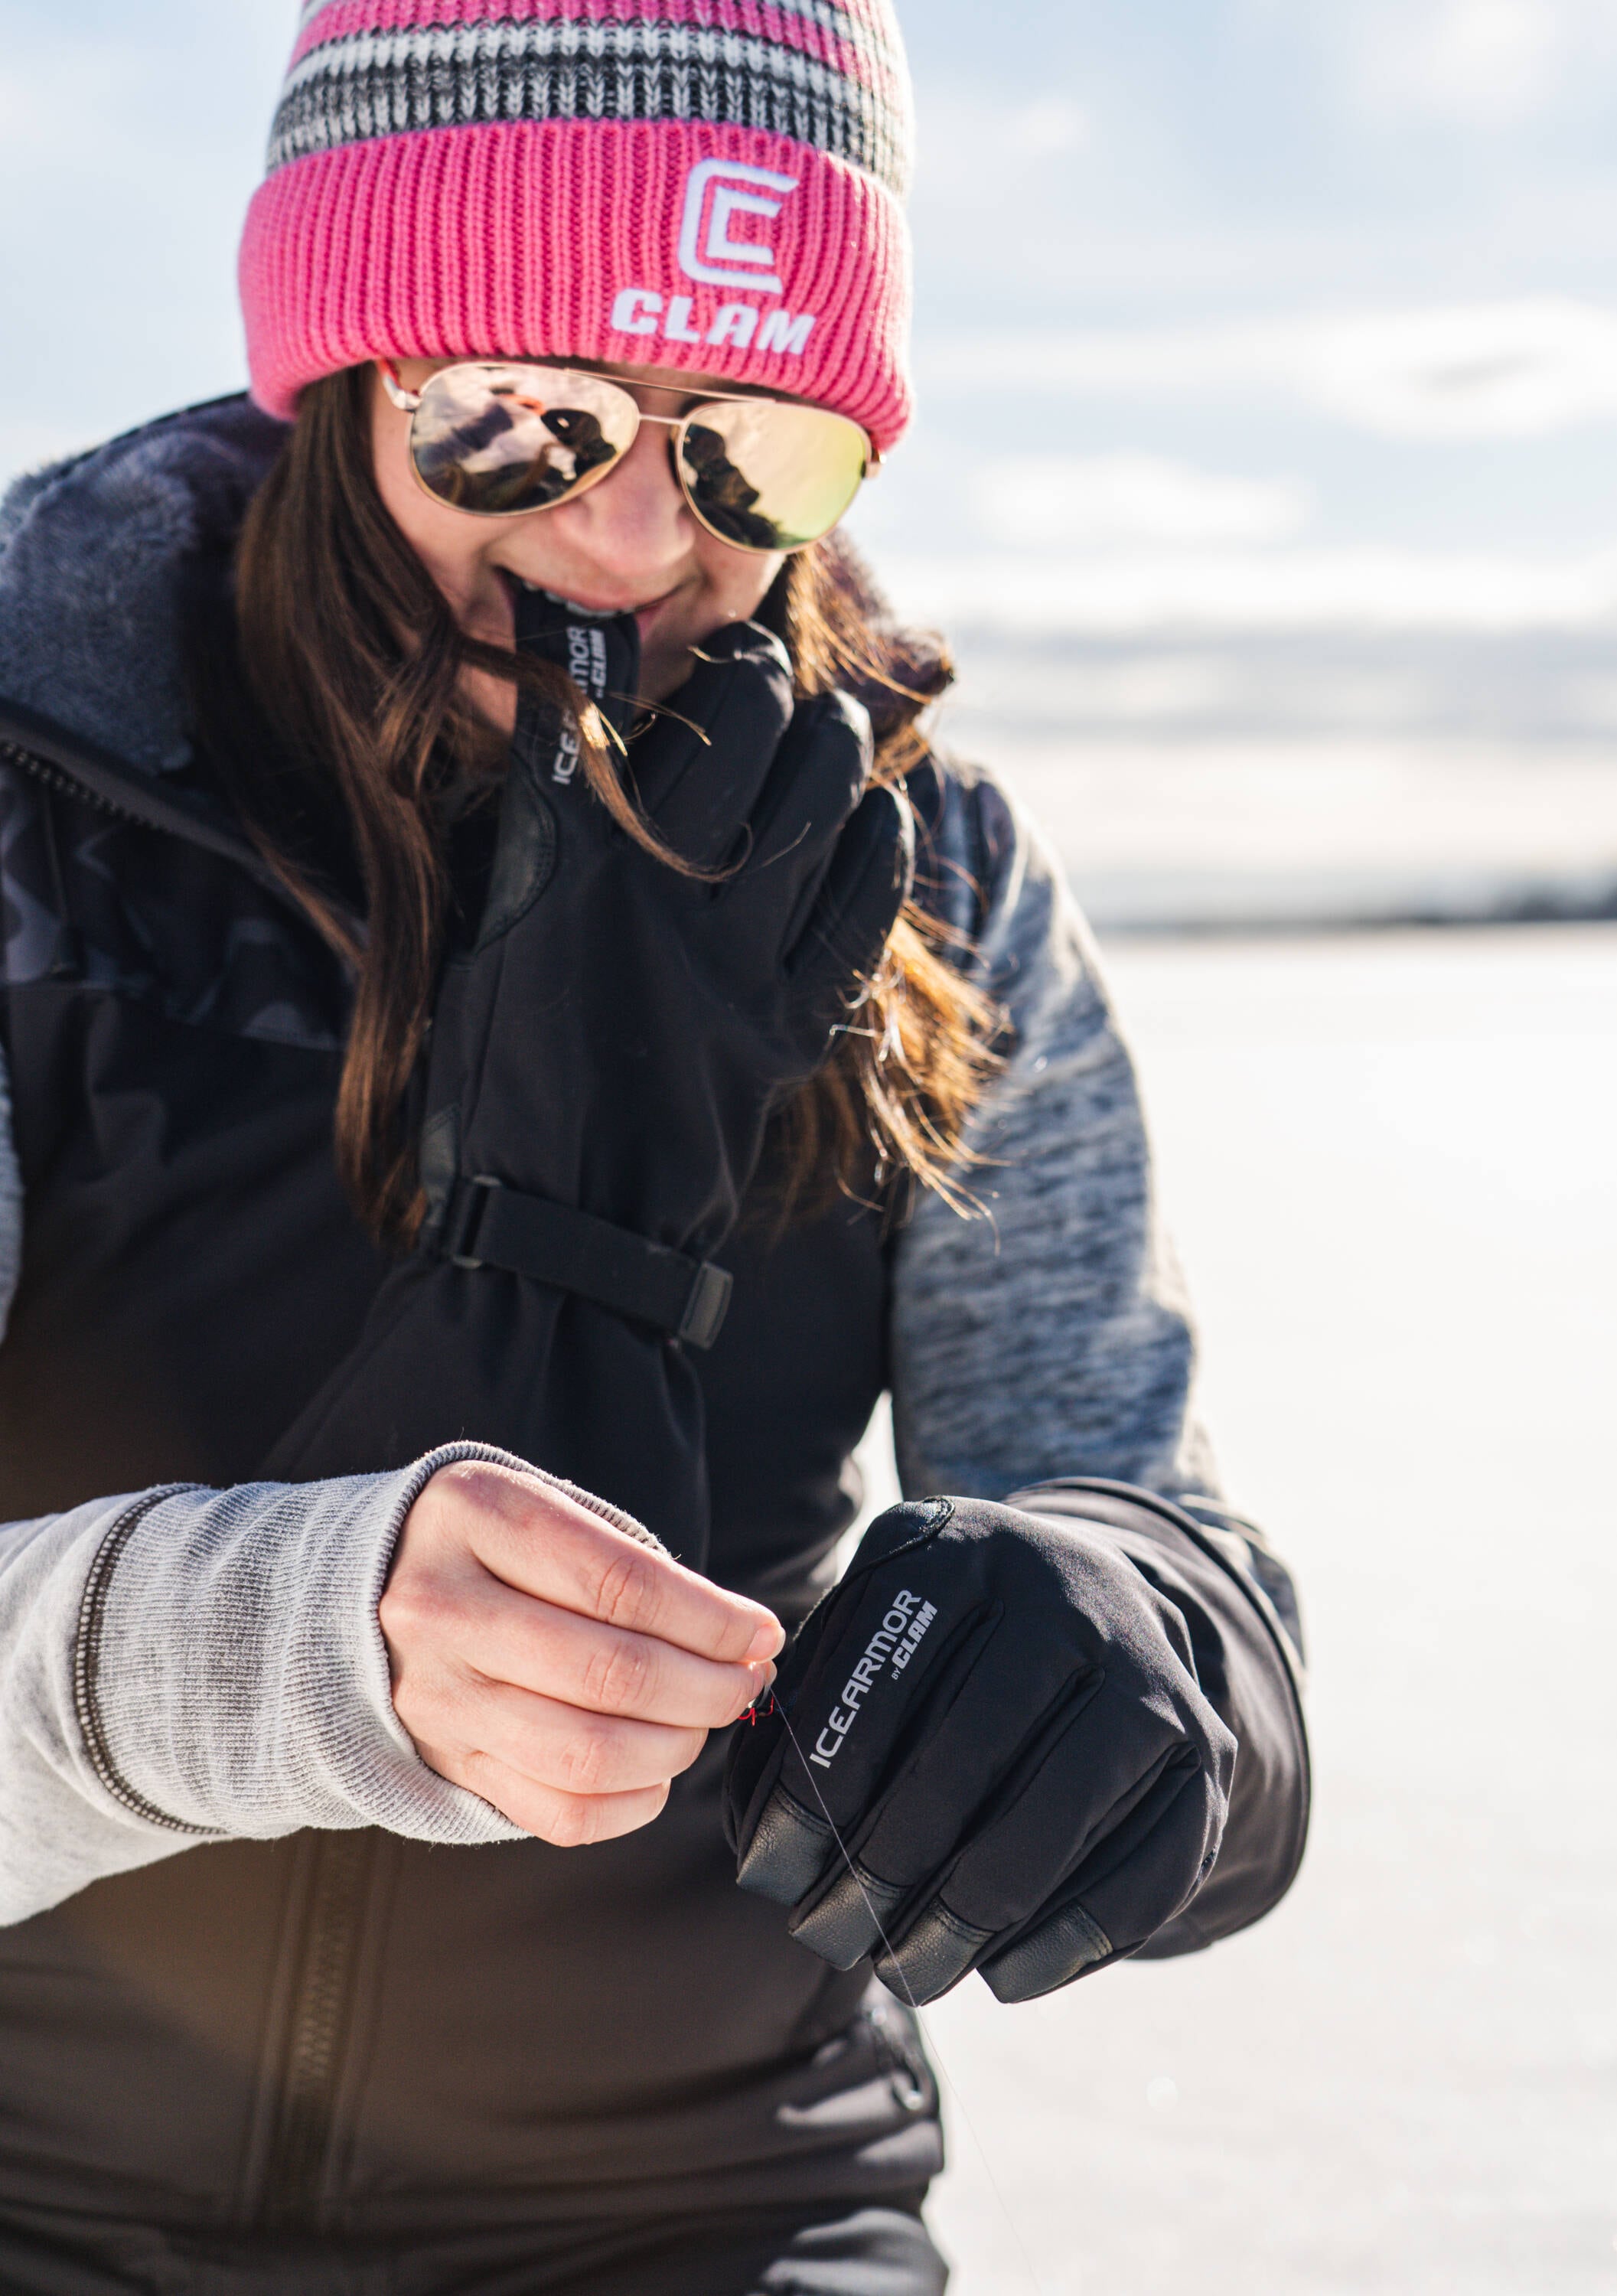 Clam Outdoors Women's Extreme Ice Fishing Glove - 2XL - Black in the Fishing  Gear & Apparel department at